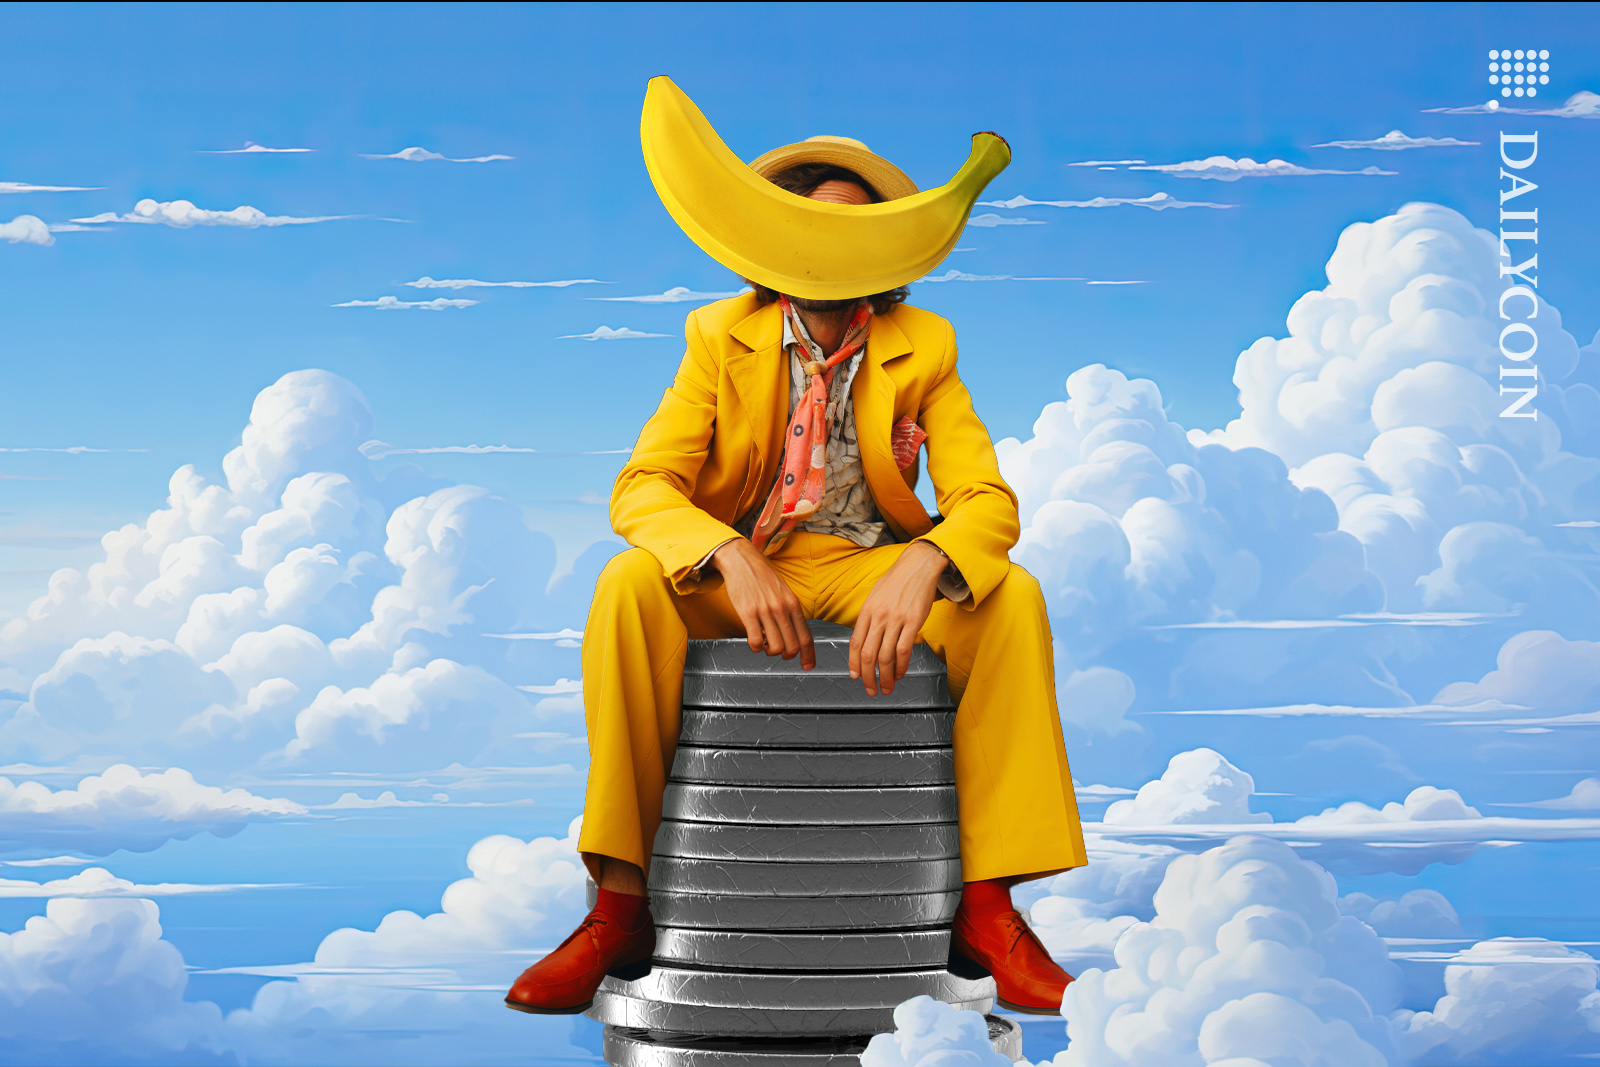 Man sitting on coins sky high, with a banana covering his face.